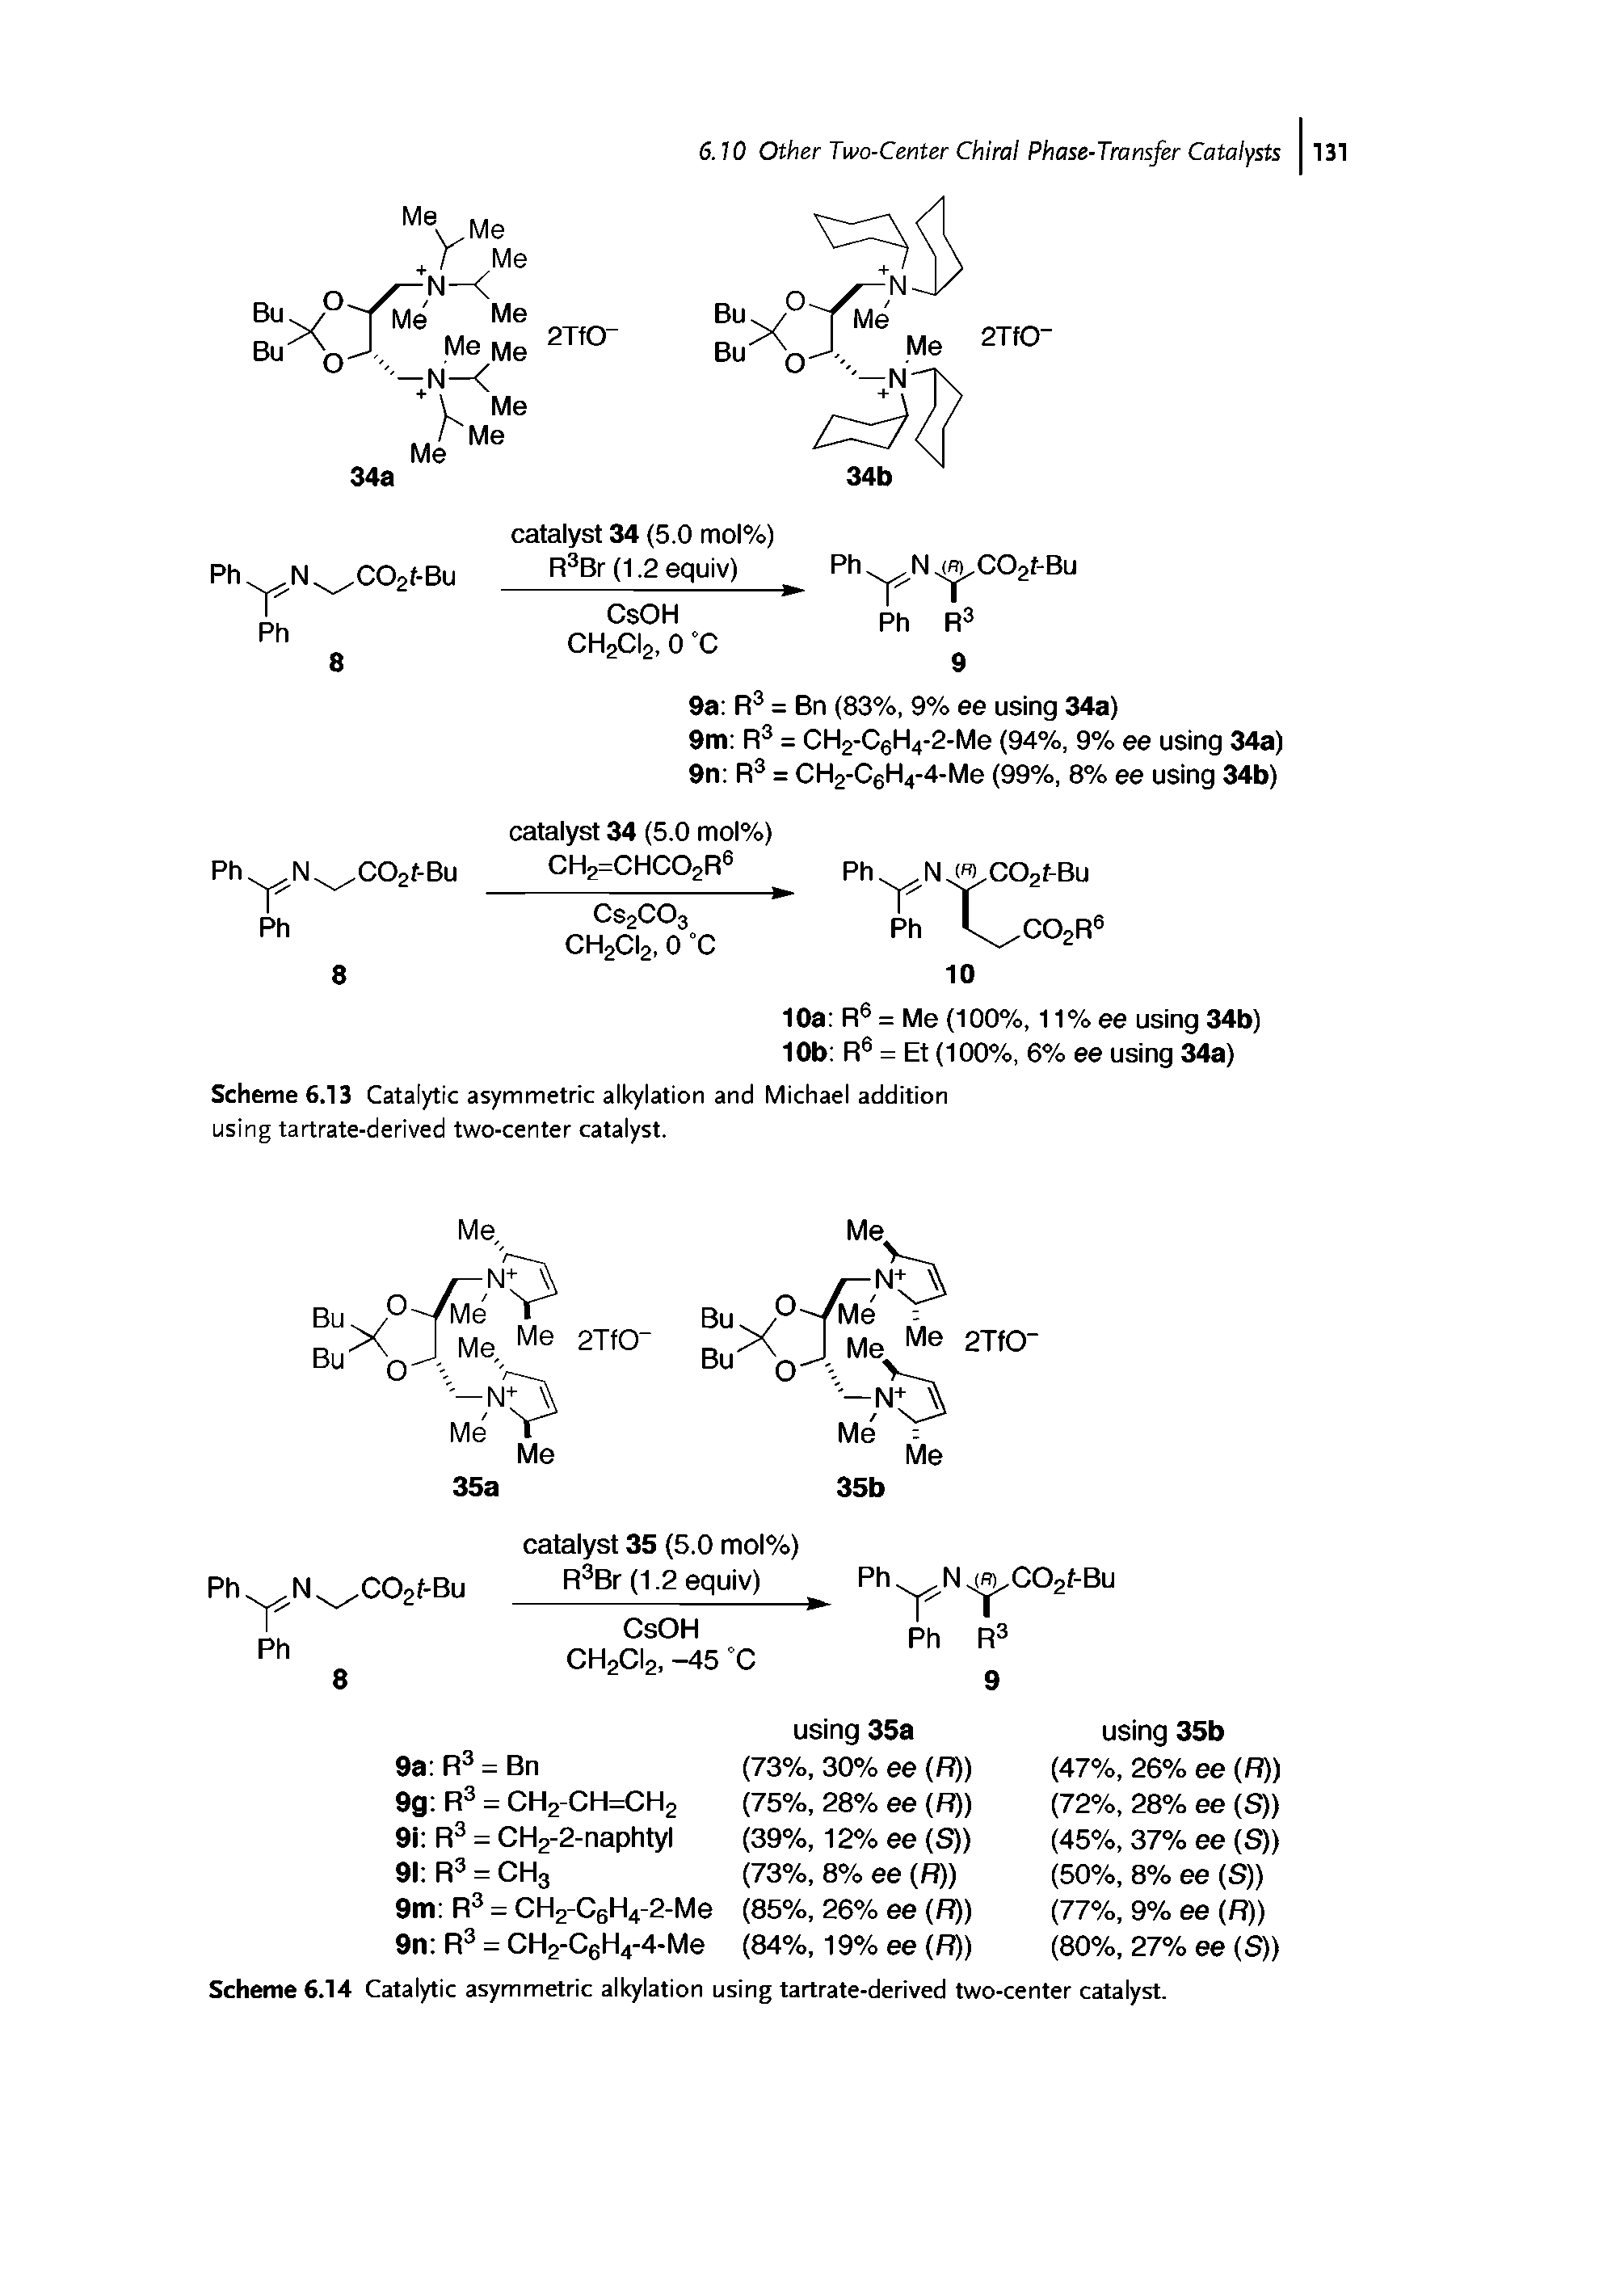 Scheme 6.13 Catalytic asymmetric alkylation and Michael addition using tartrate-derived two-center catalyst.